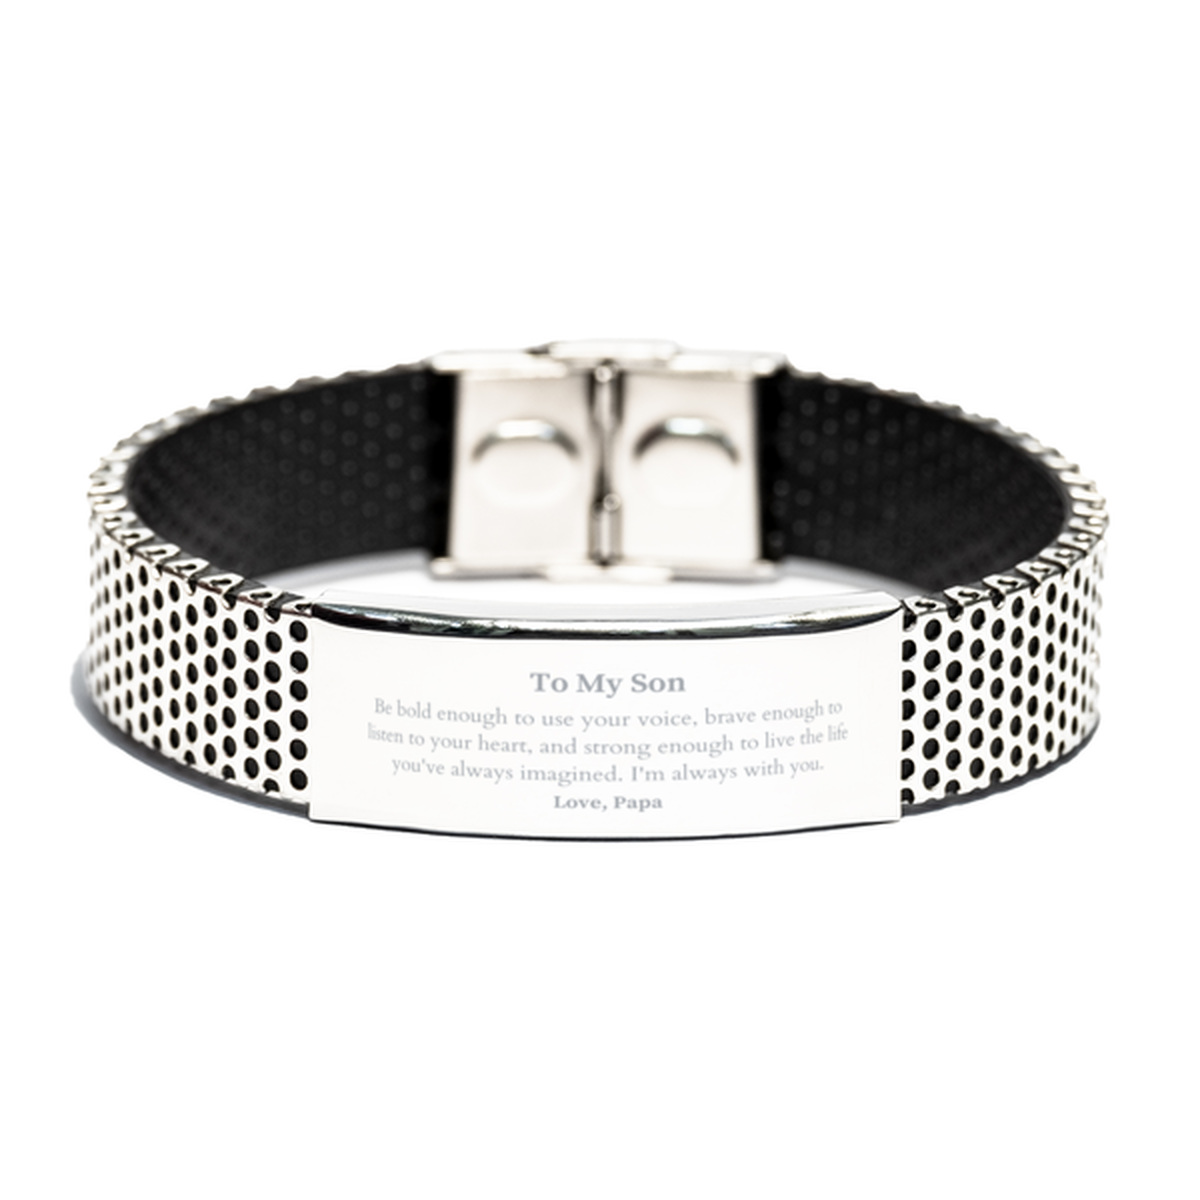 Keepsake Son Stainless Steel Bracelet Gift Idea Graduation Christmas Birthday Son from Papa, Son Be bold enough to use your voice, brave enough to listen to your heart. Love, Papa